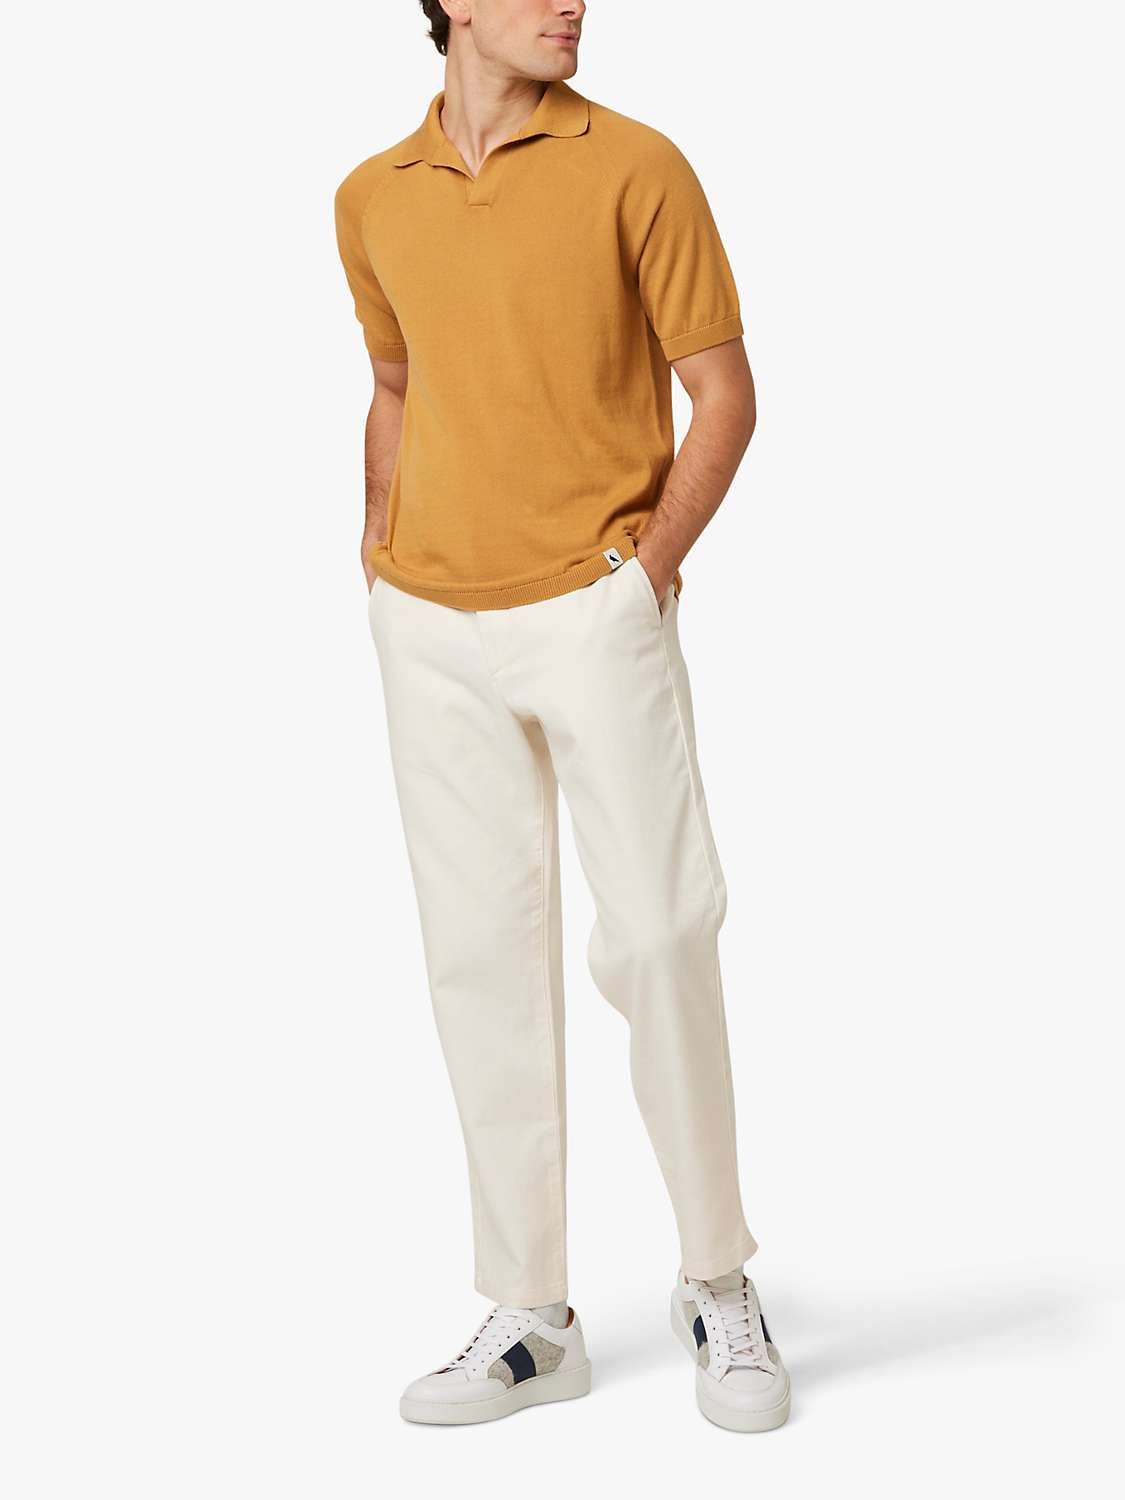 Buy Peregrine Emery Polo Shirt, Amber Online at johnlewis.com